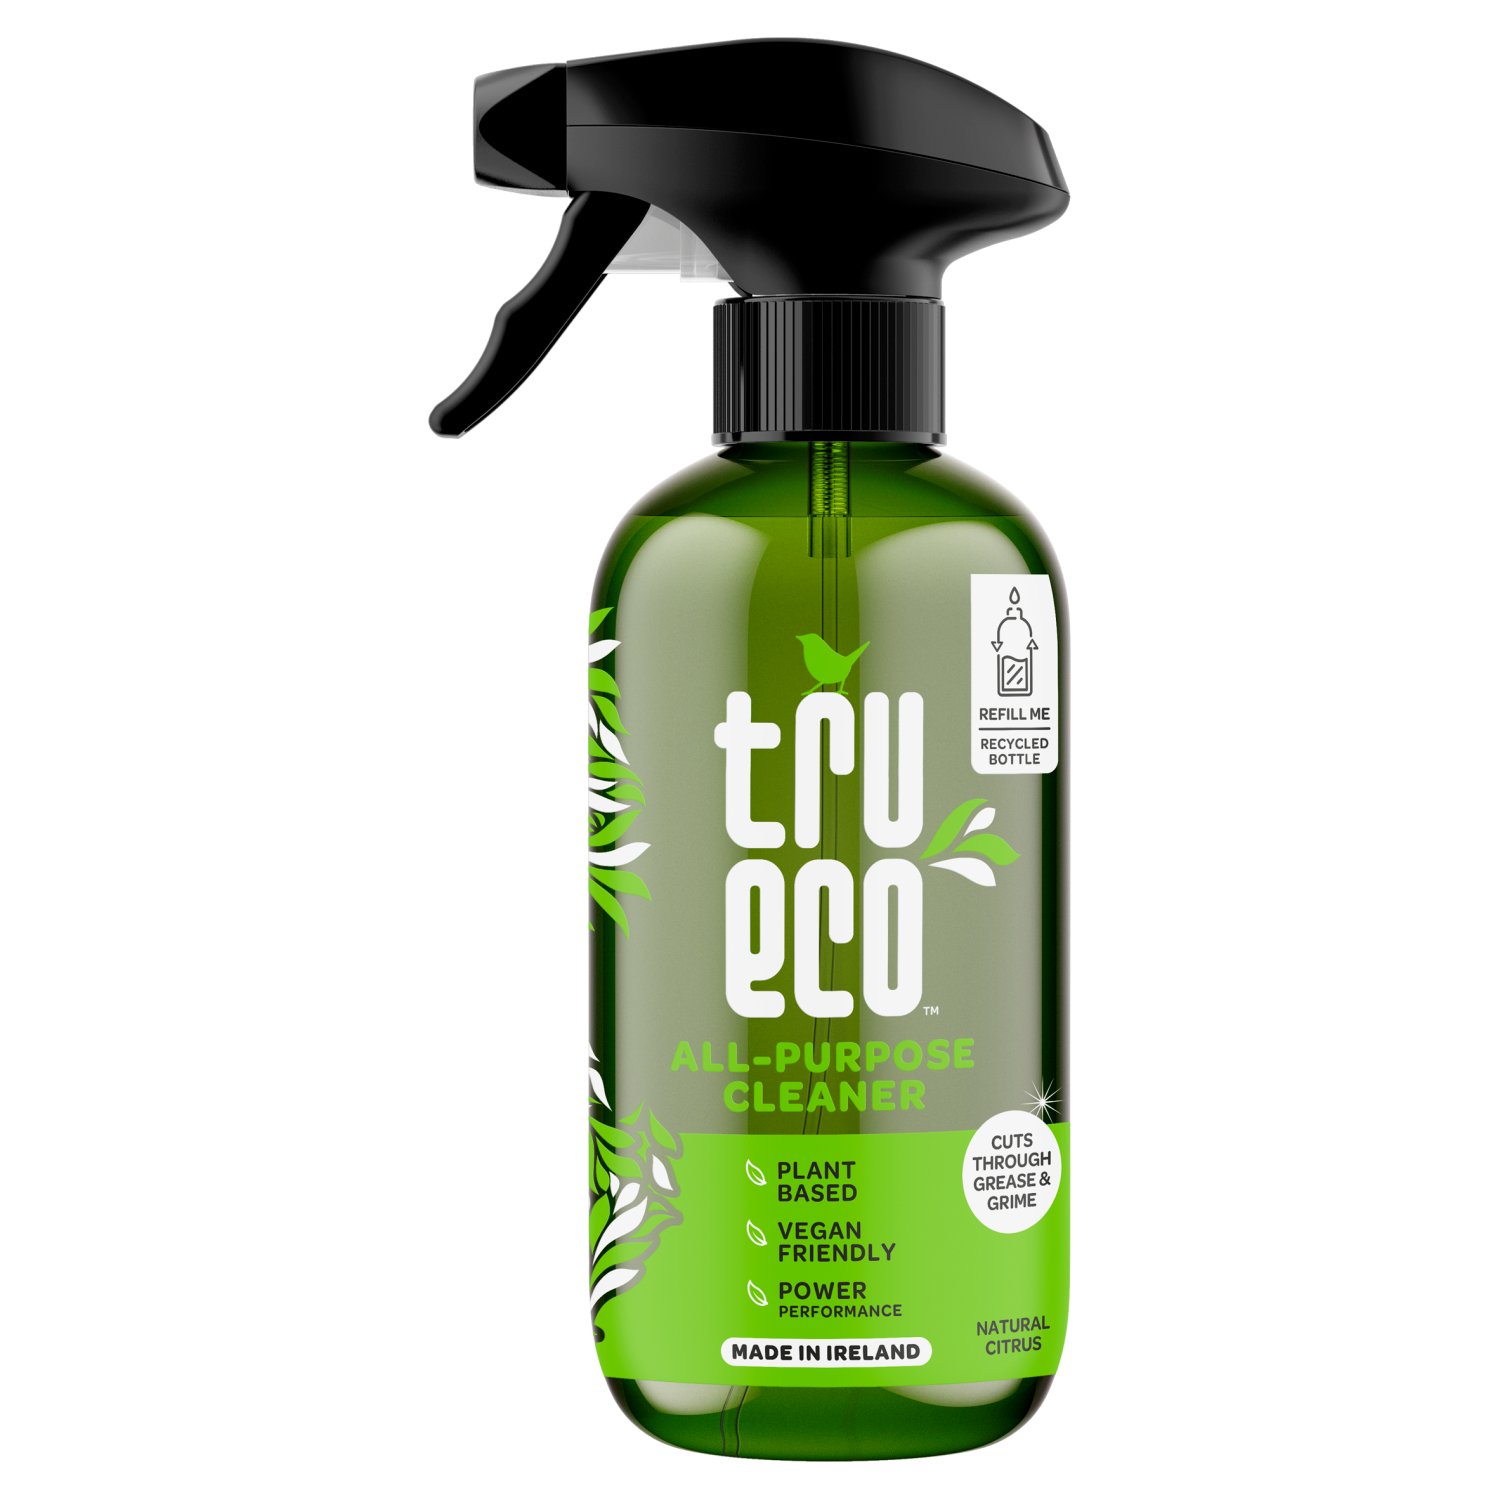 Tru Eco is a natural, biodegradable, eco-friendly all-purpose cleaner. These natural ingredients work together to provide a powerful performance that cuts through grease and grime, leaving a naturally clean surface.